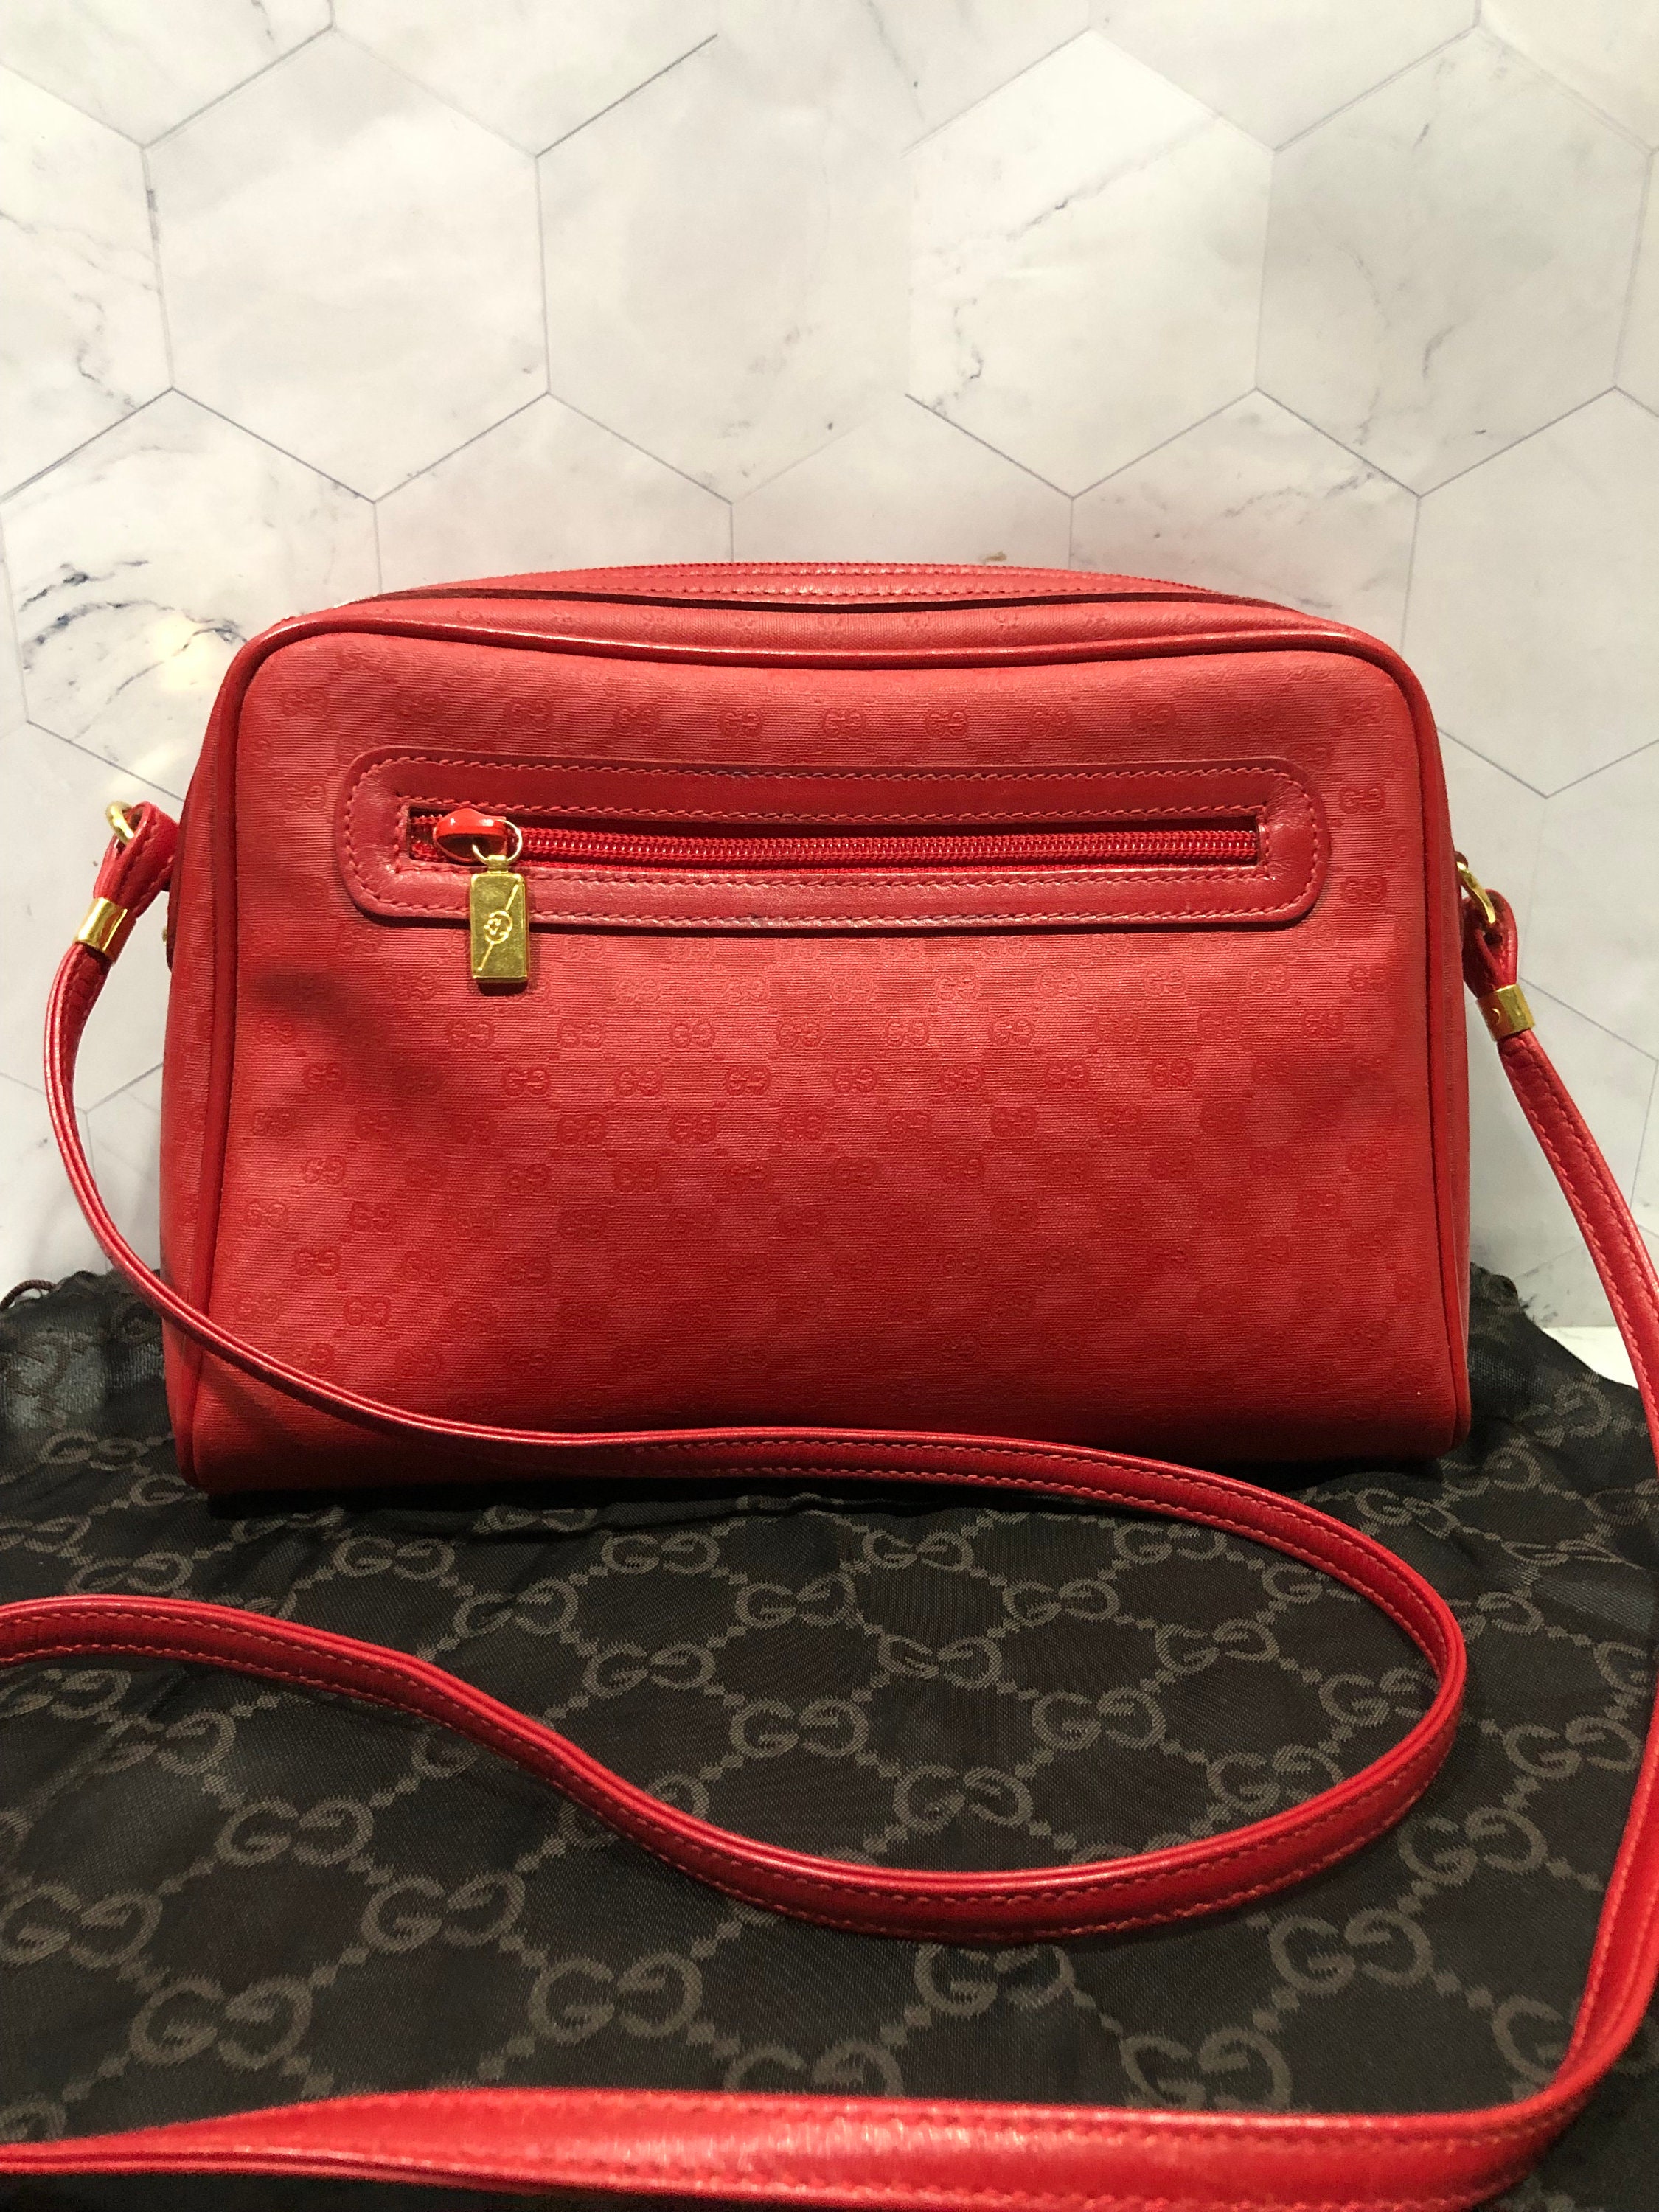 Gucci Red Leather Gold Bee Disco Camera Shoulder Crossbody Bag Red x Black  Web